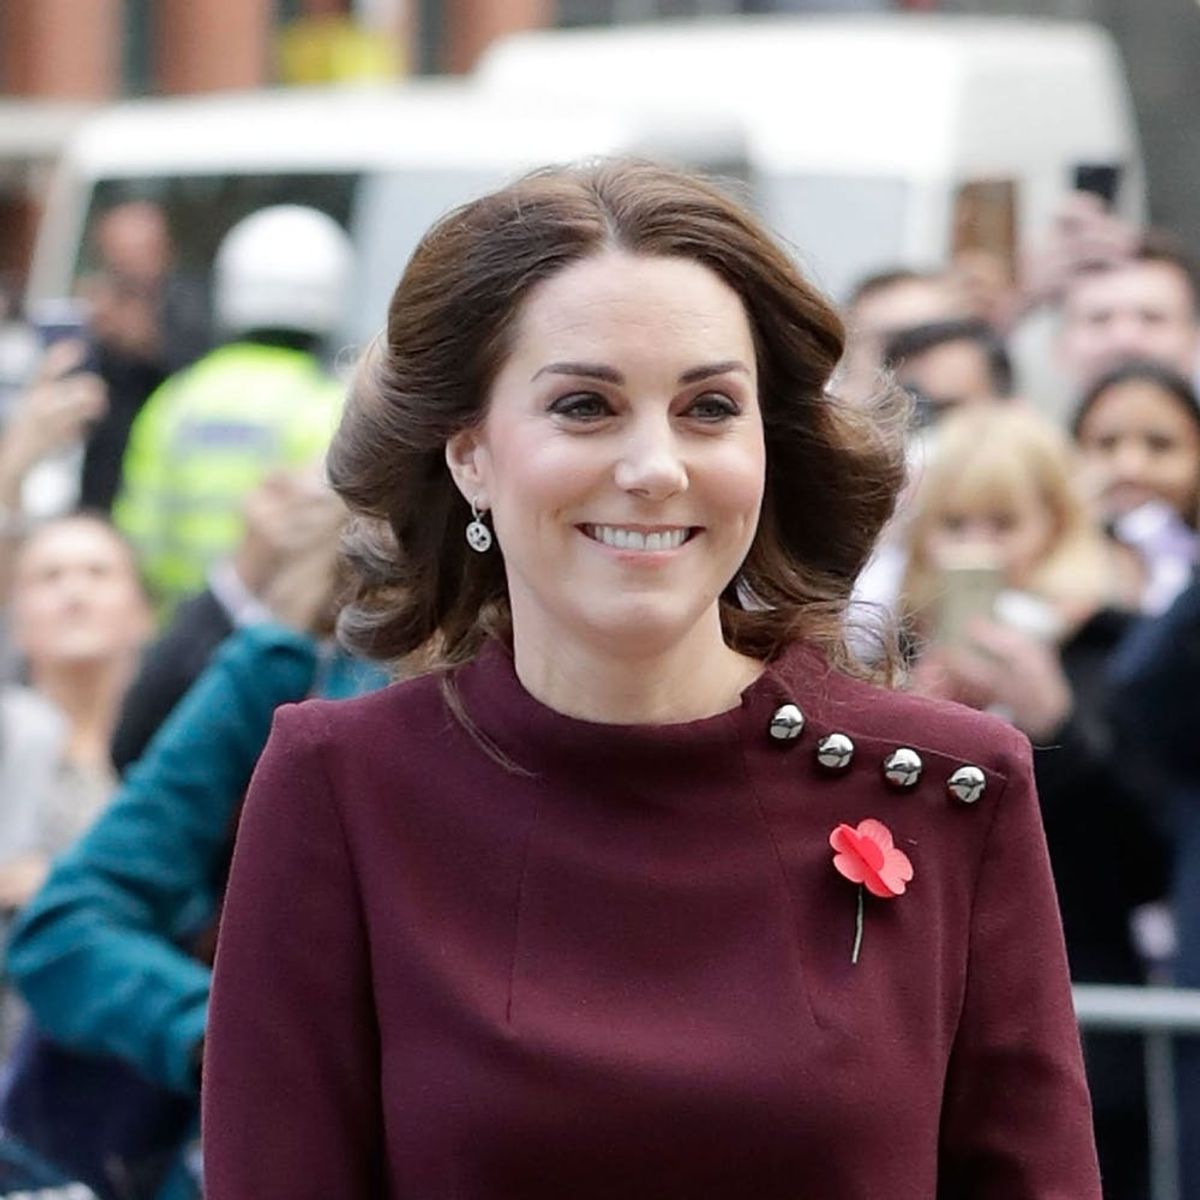 Kate Middleton Reveals How Dropping Prince George Off at School Gave Her New Insight on Motherhood